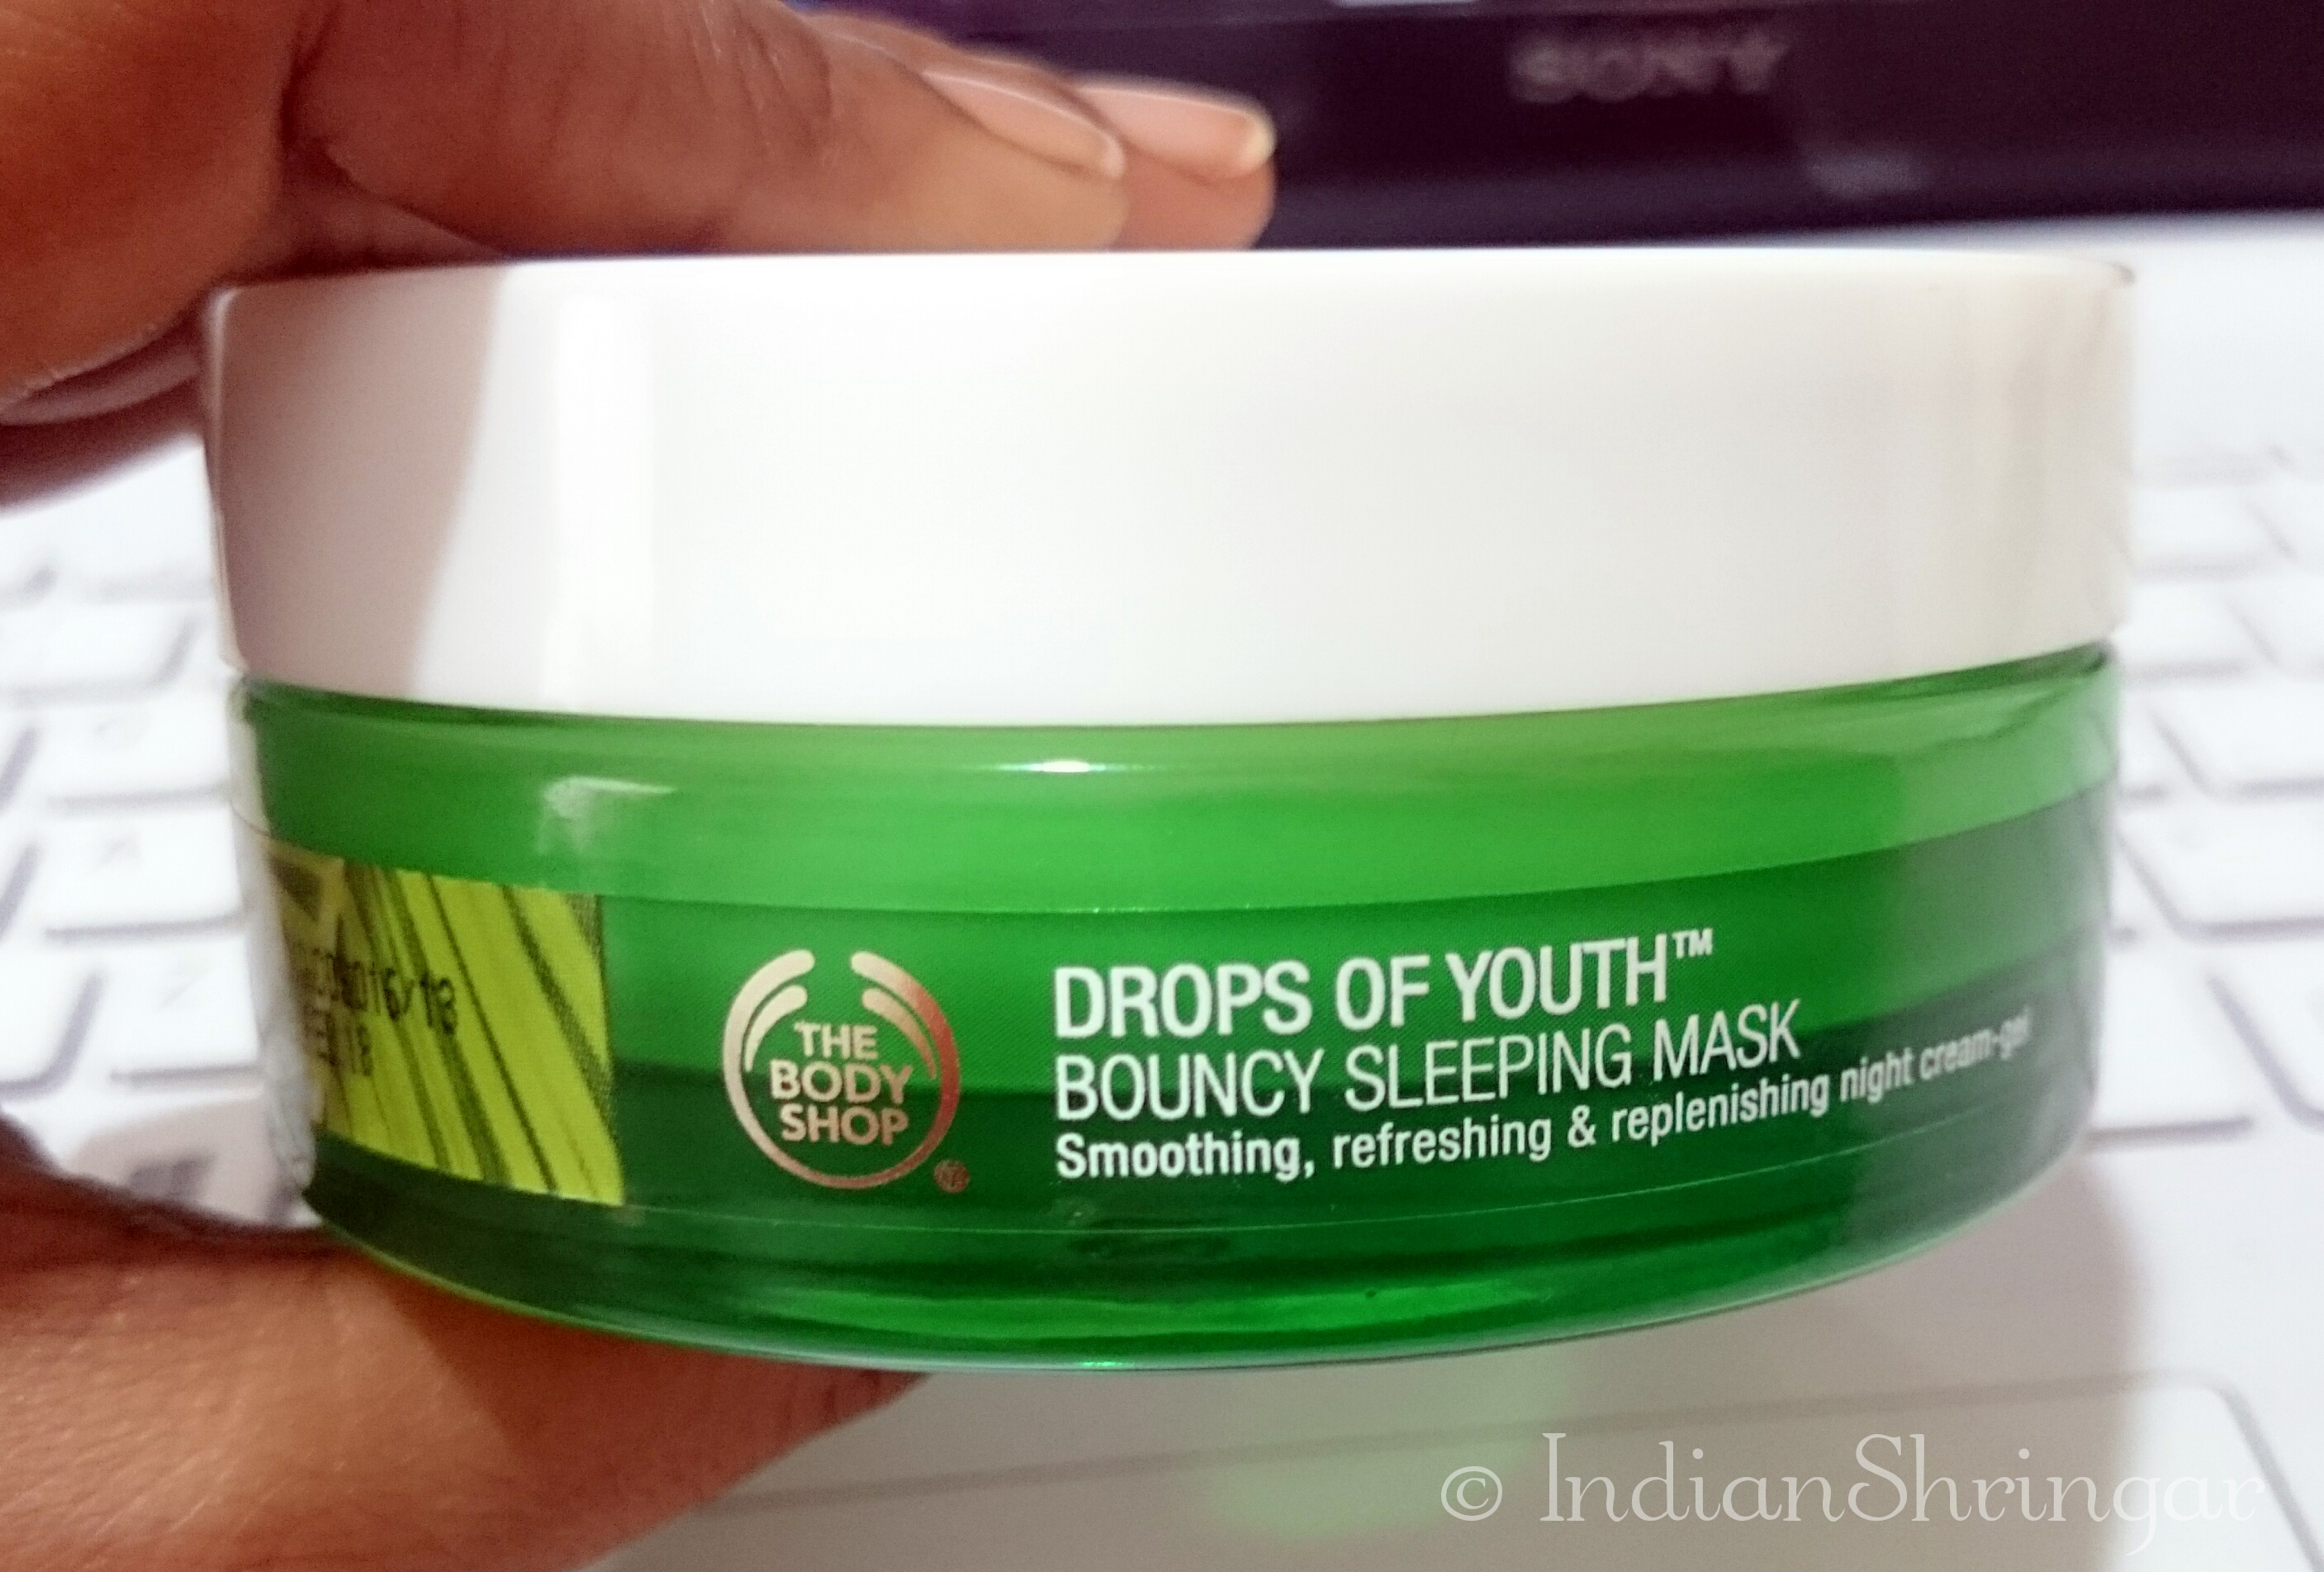 The Body Shop Drops Of Youth Bouncy Sleeping Mask review